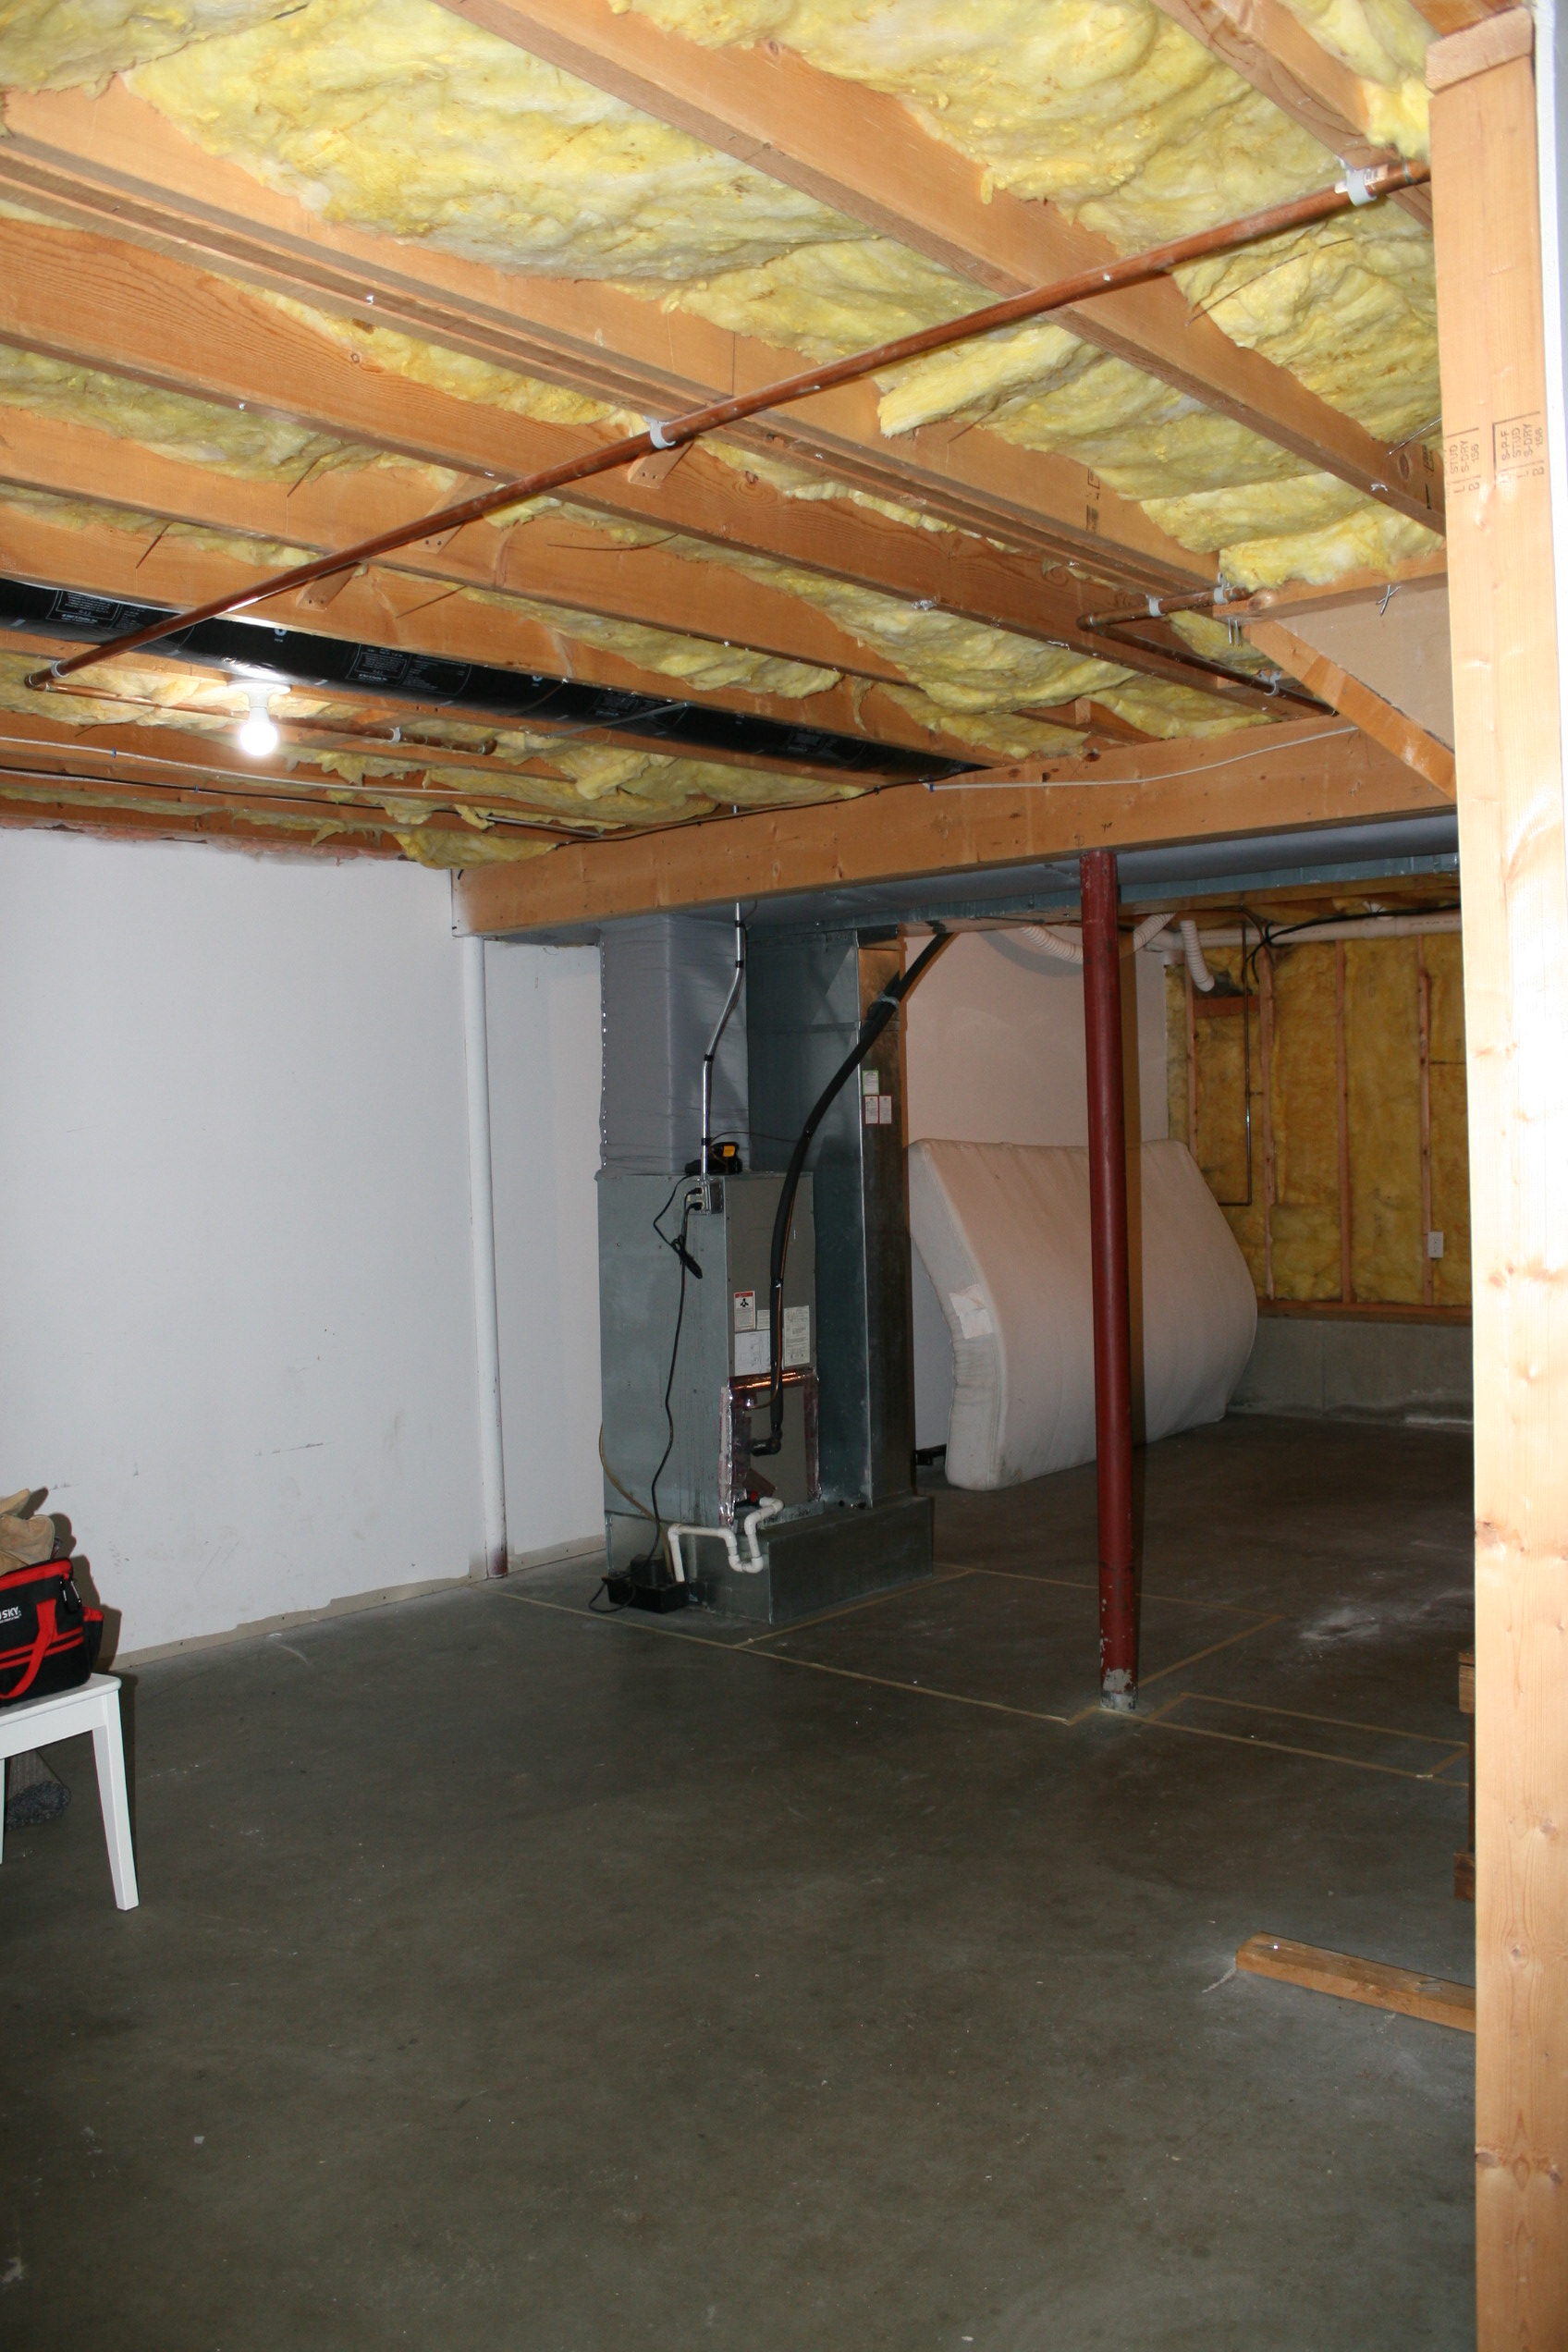 Finishing the Basement: Before Pictures and Plans